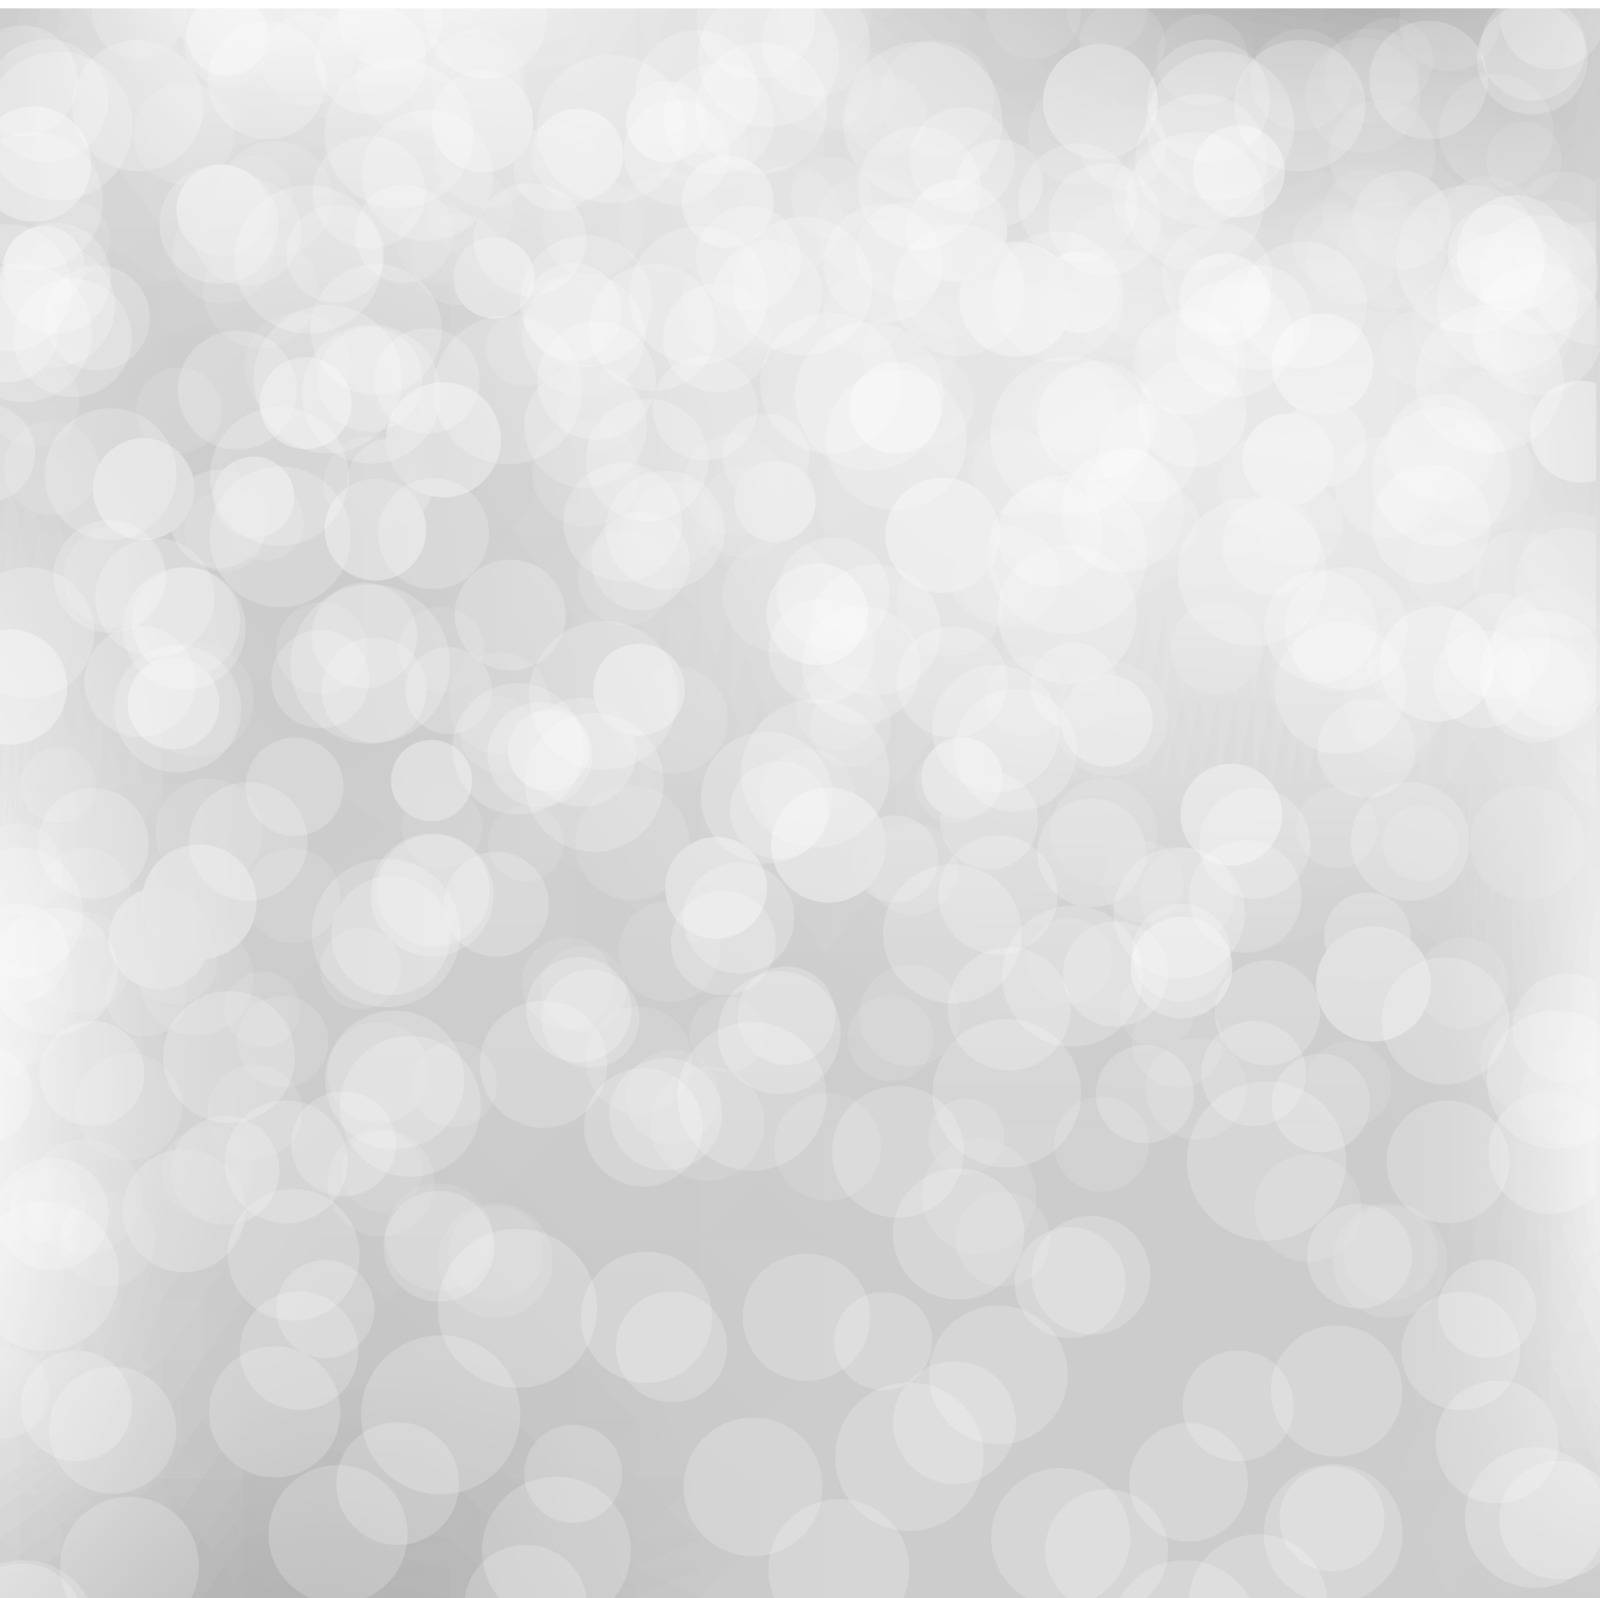 Silver Bokeh Poster With Gradient Mesh, Vector Illustration